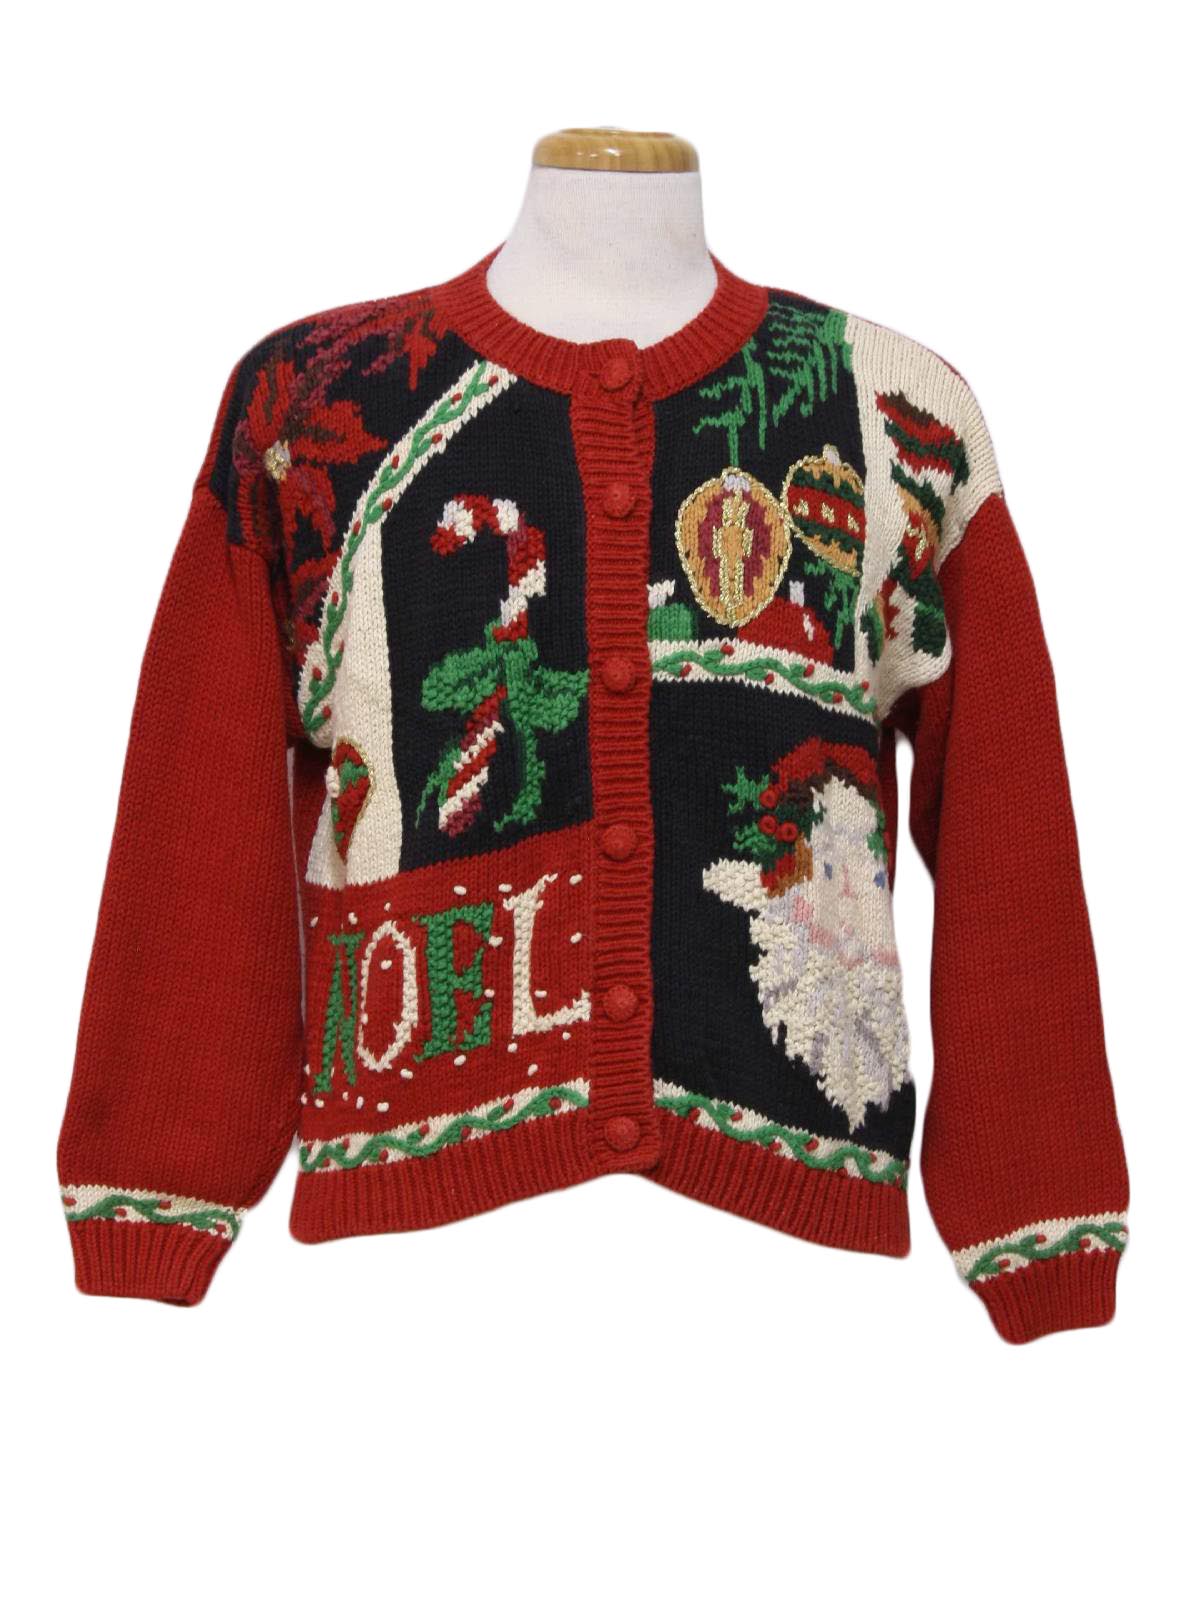 Womens Ugly Christmas Sweater : -Heirloom Collectibles- Womens Red ...